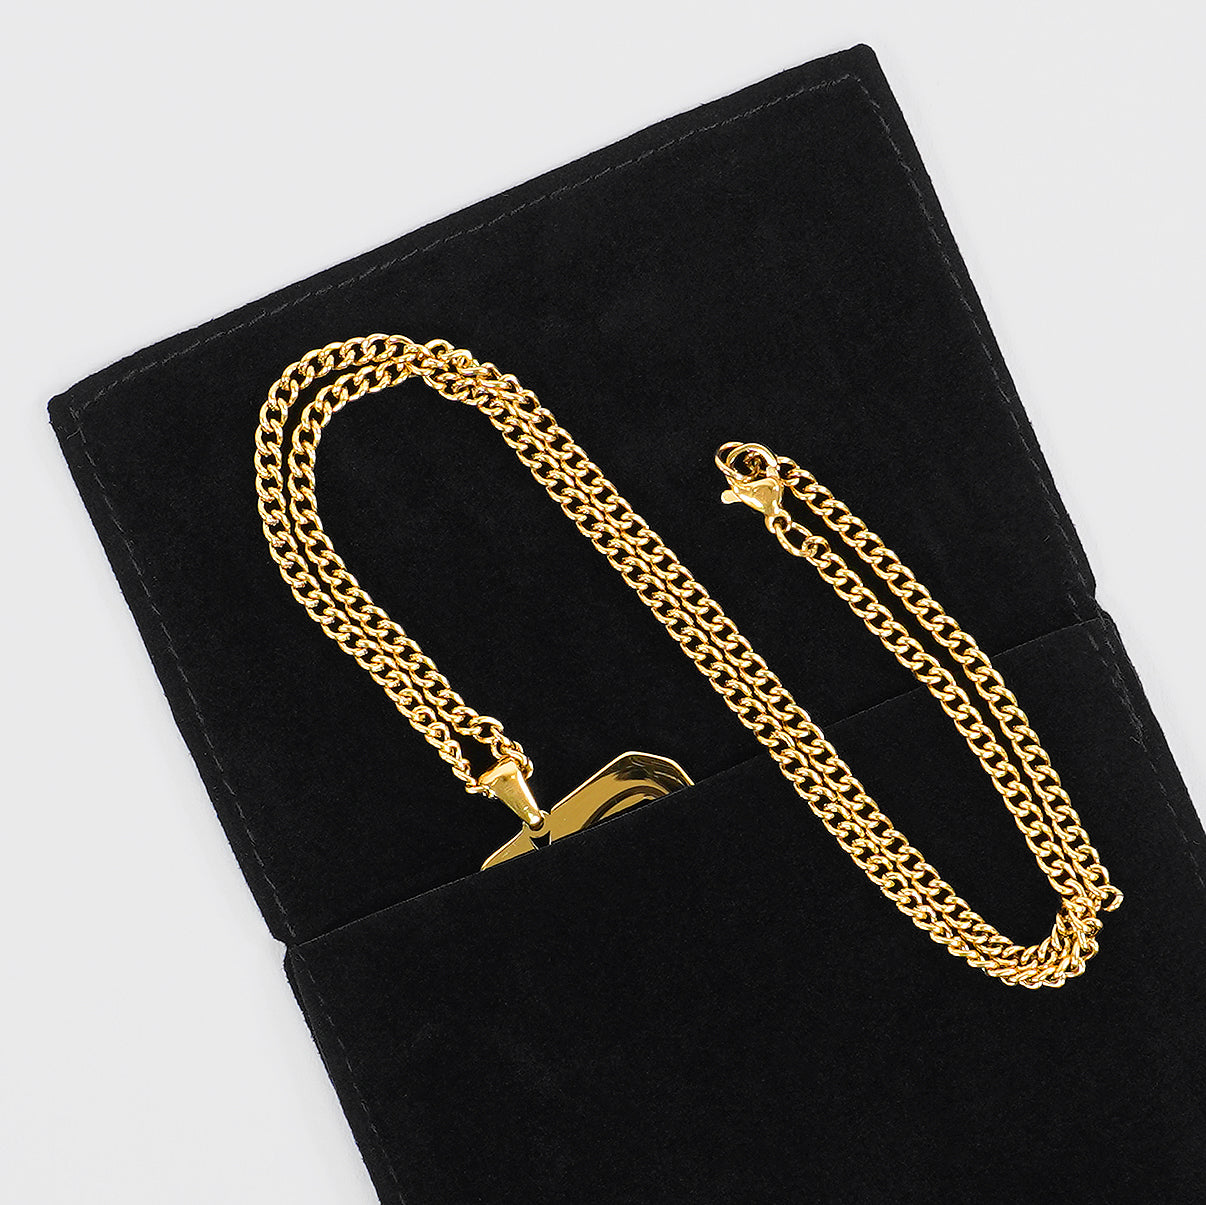 93 Number Pendant with Chain Necklace - Gold Plated Stainless Steel